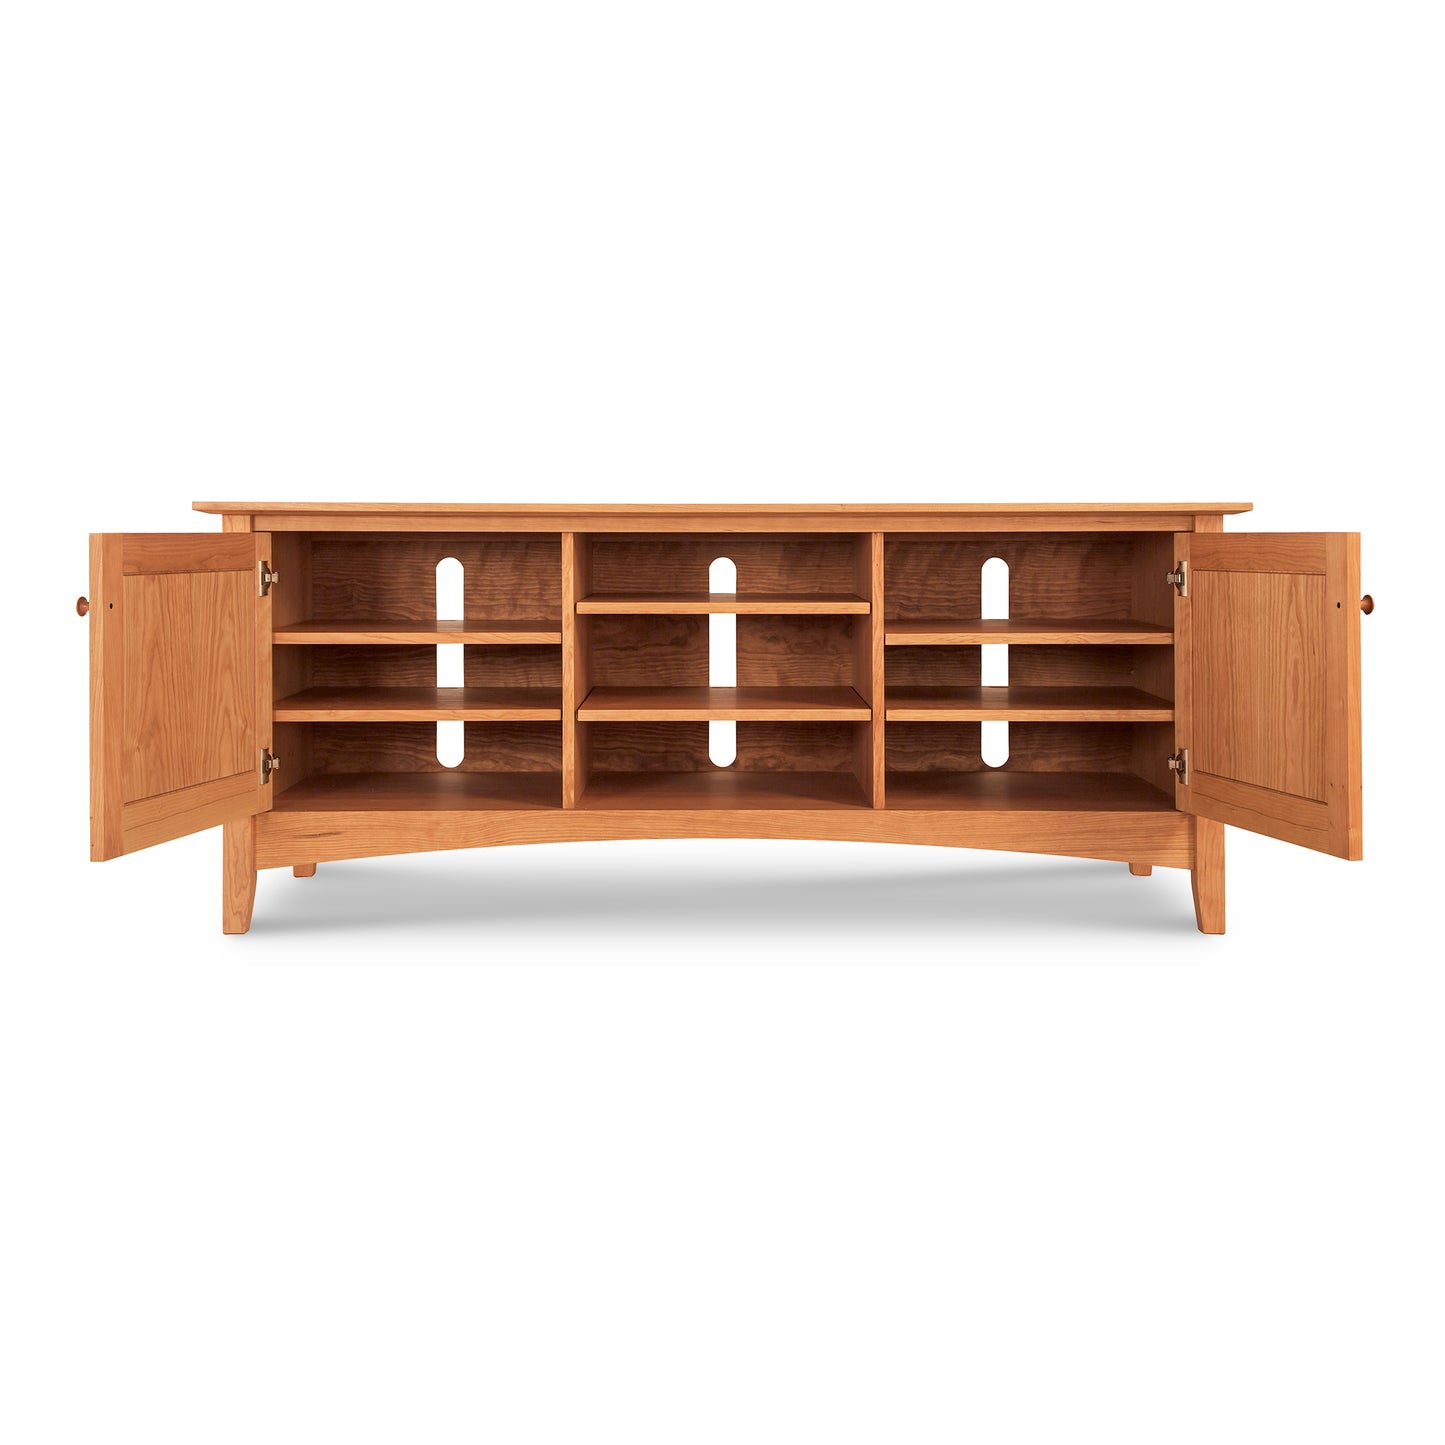 An Maple Corner Woodworks American Shaker 67" TV stand crafted from solid hardwoods, featuring open shelves and two side cabinets, isolated on a white background.